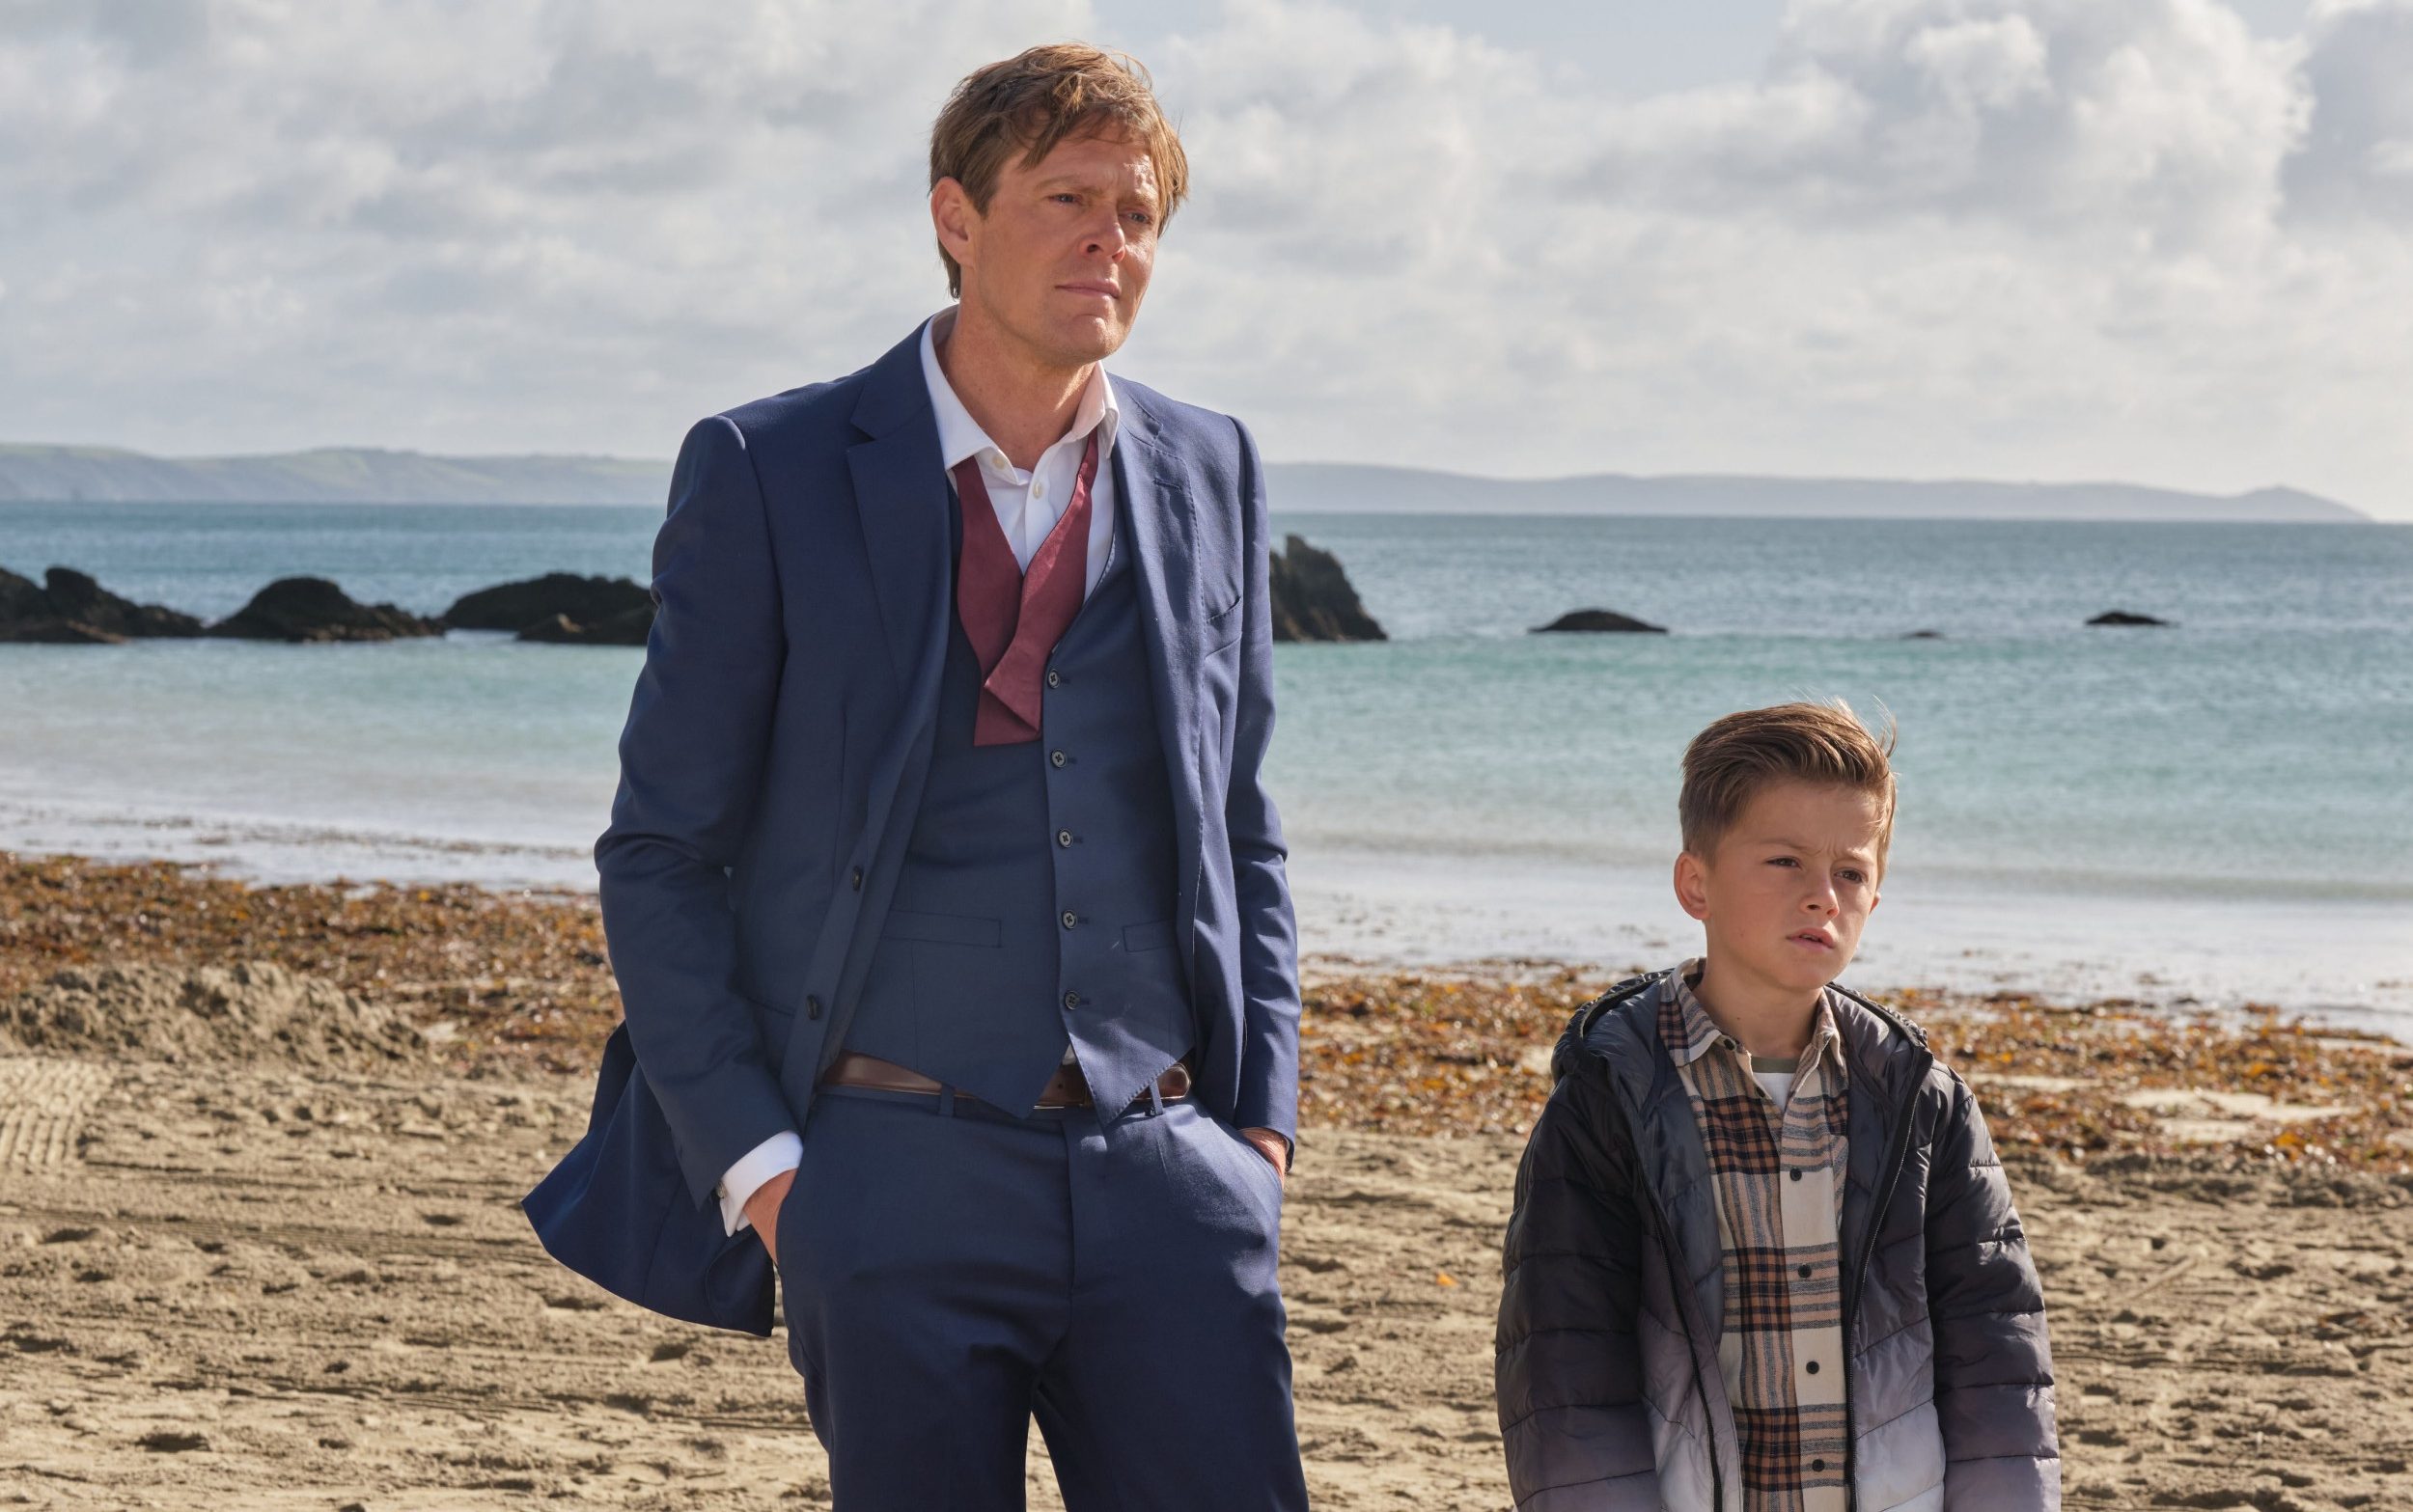 beyond paradise, series 2 finale, review: forget doctor who, kris – this show is perfect for you